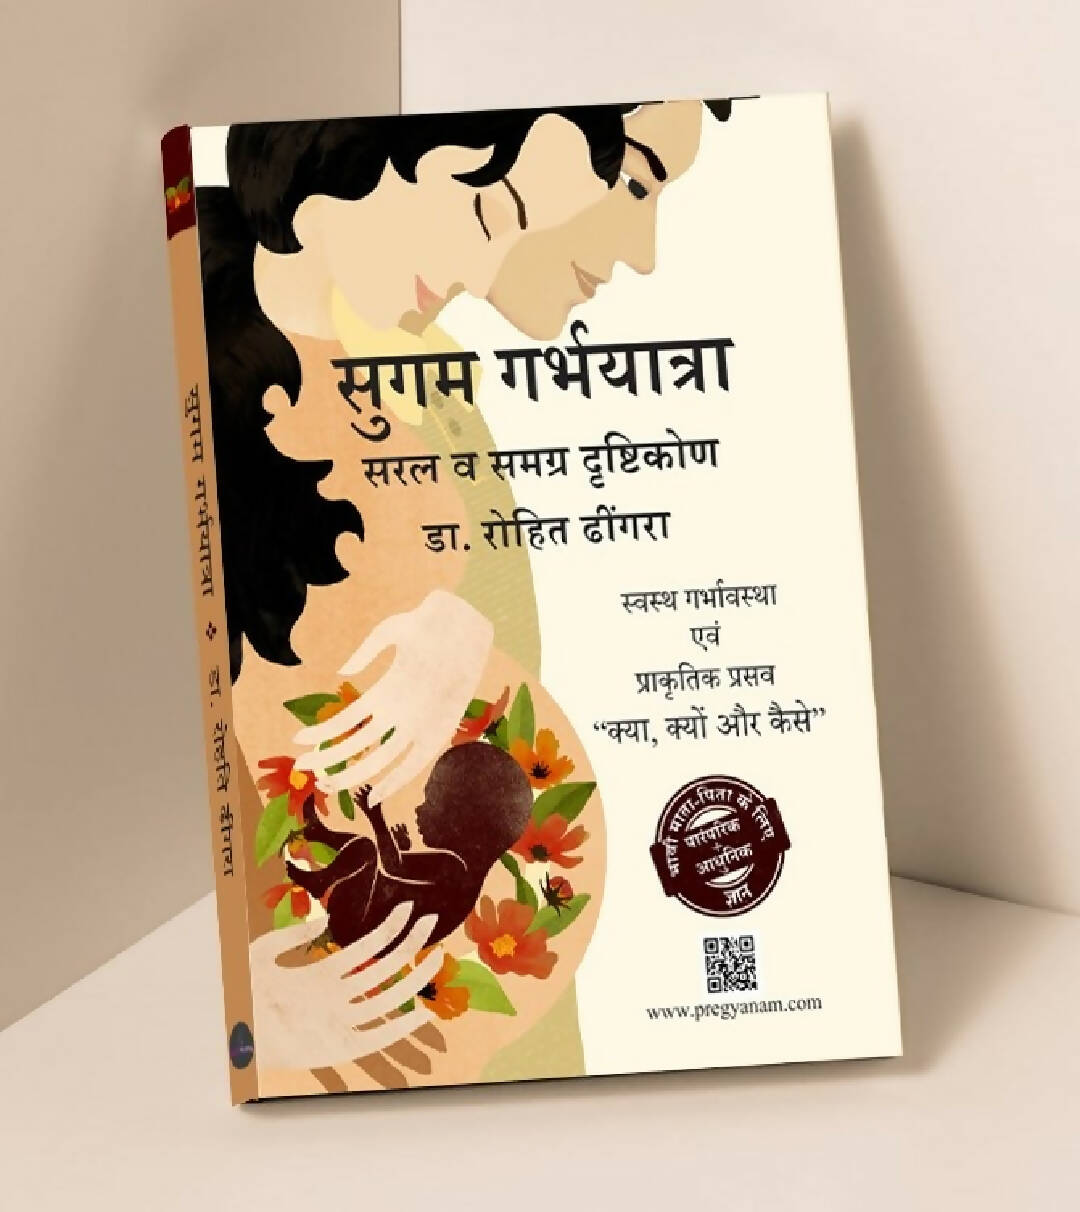 Best Hindi Guide on Pregnancy & Post-Delivery "SUGAM GARBHYATRA"|Garbh Sanskar&Garbhavidya for women|Healthy Pregnancy&Natural Delivery book for expecting Mothers|Delivery Planning|Father's guide|Mental Health|2nd Version|Hardcover